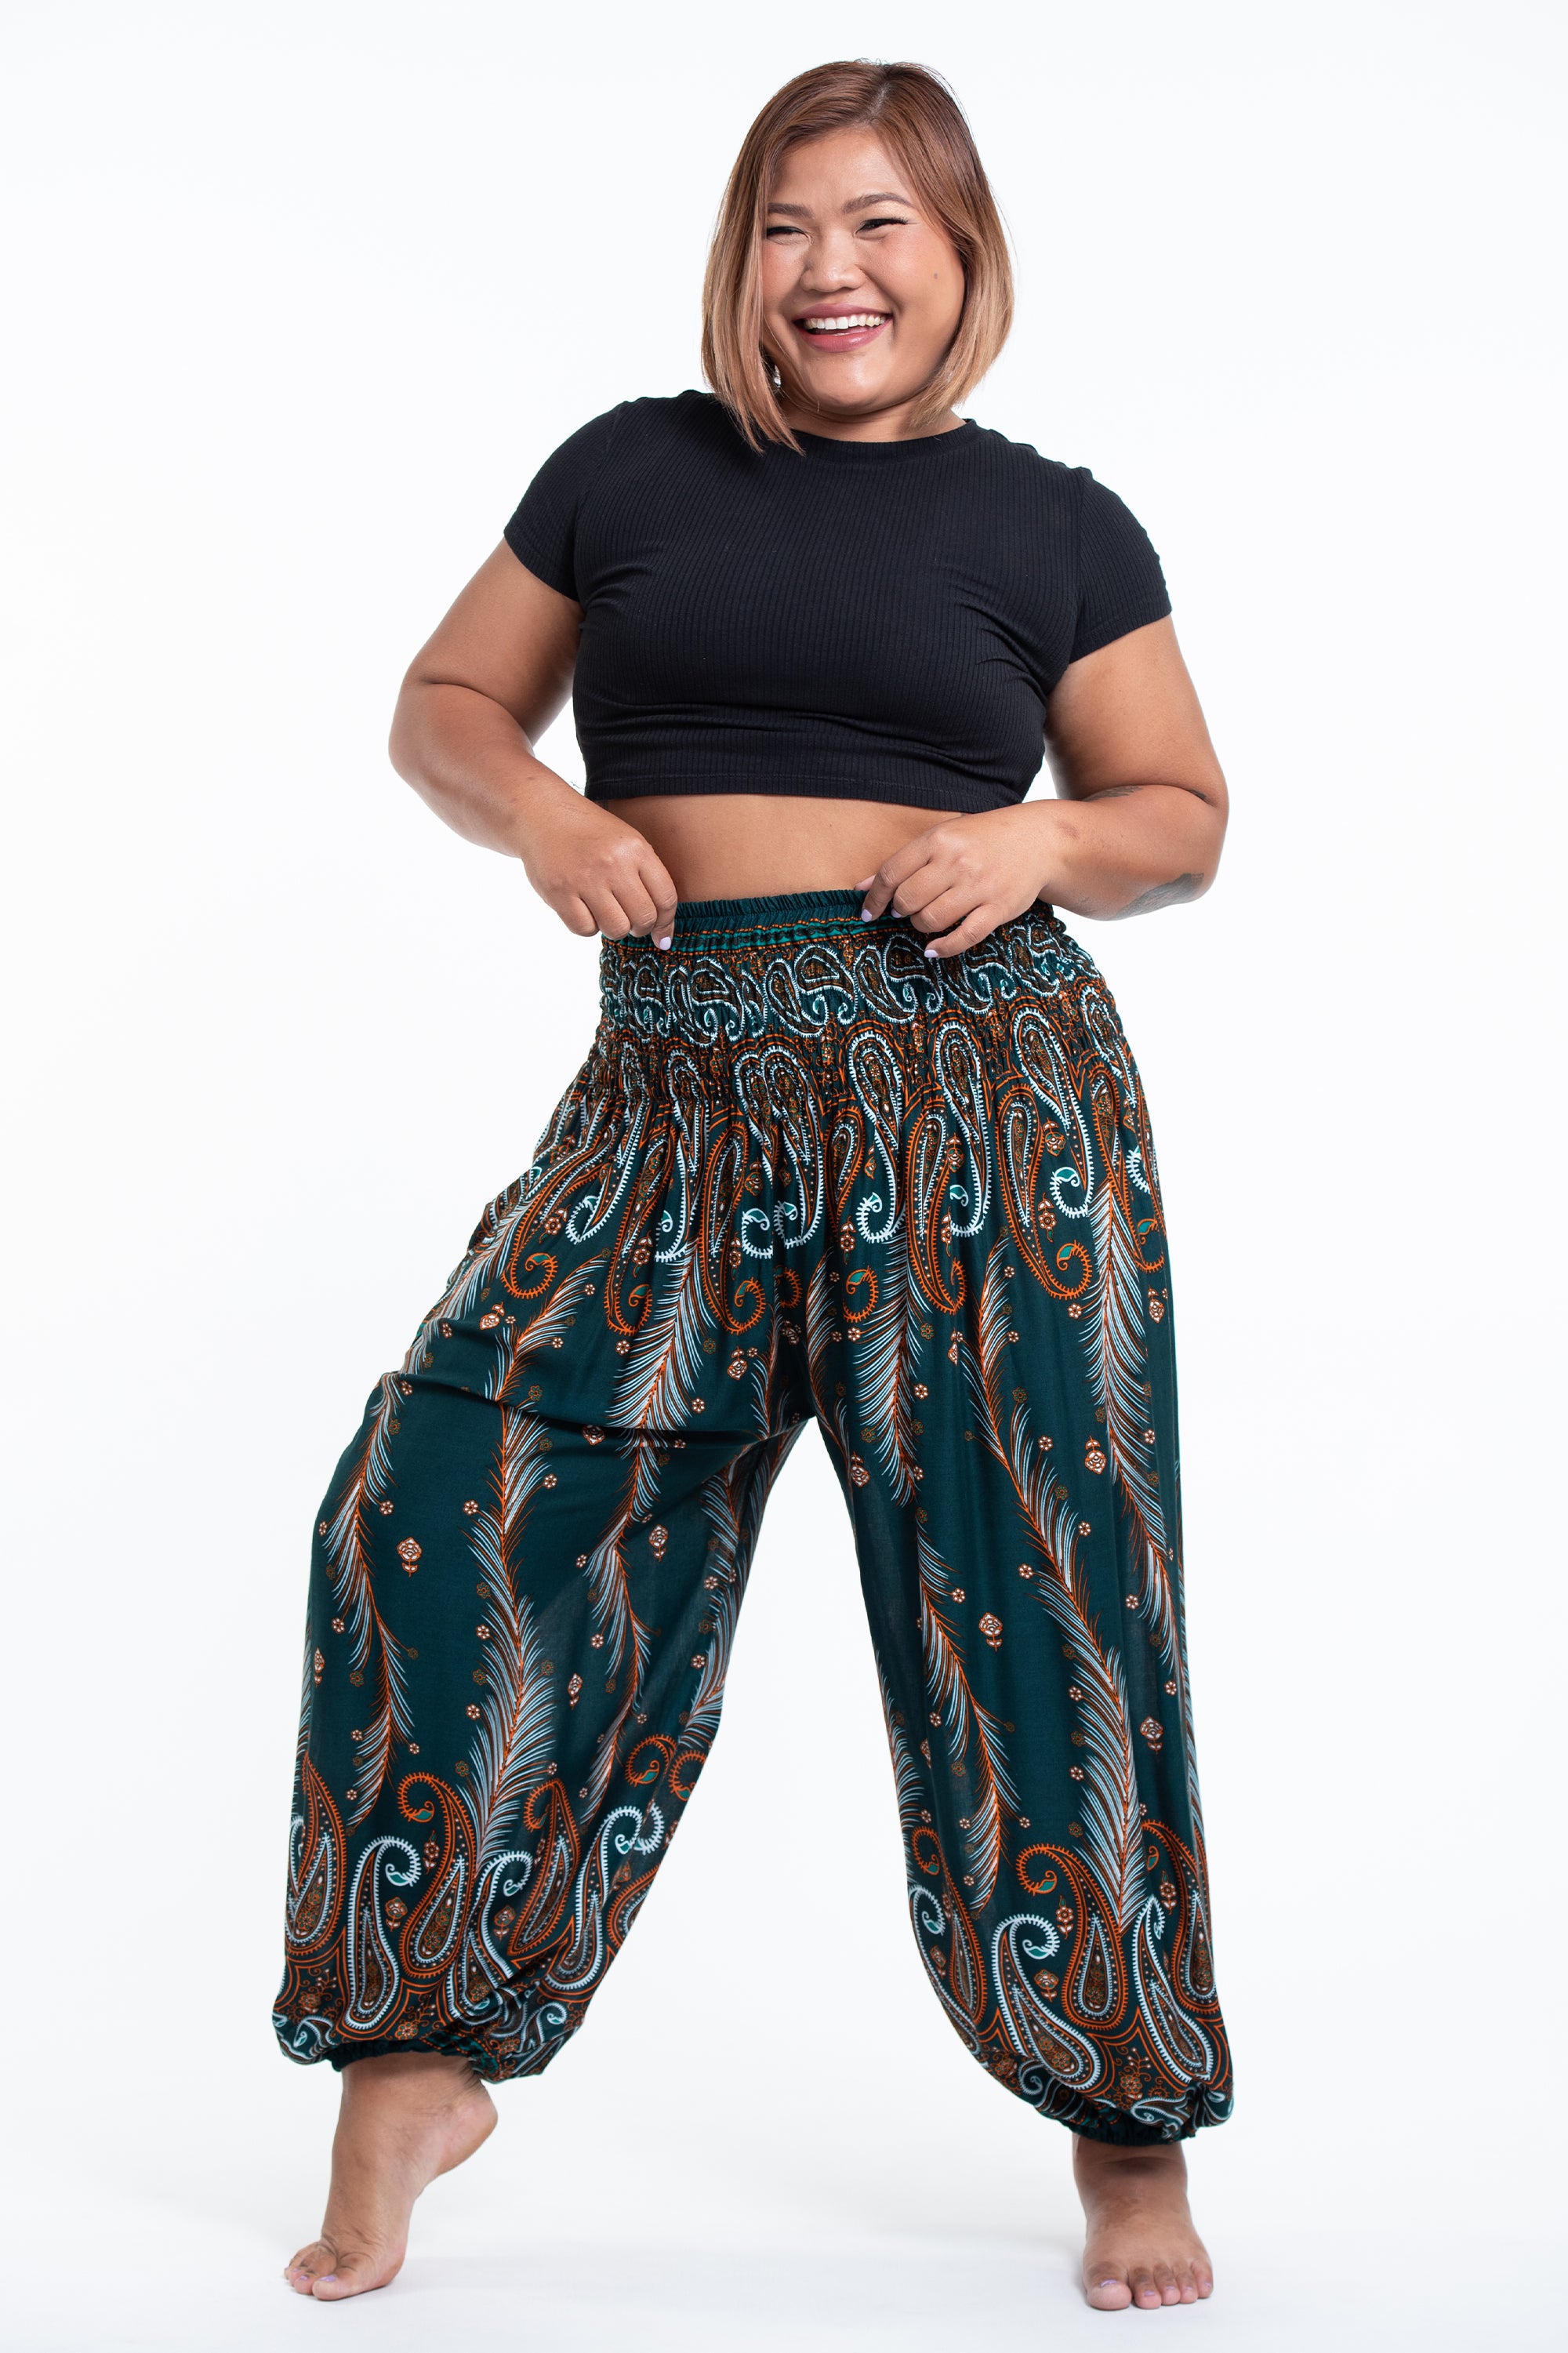 Solid Color Women's Tall Harem Pants in Dark Green